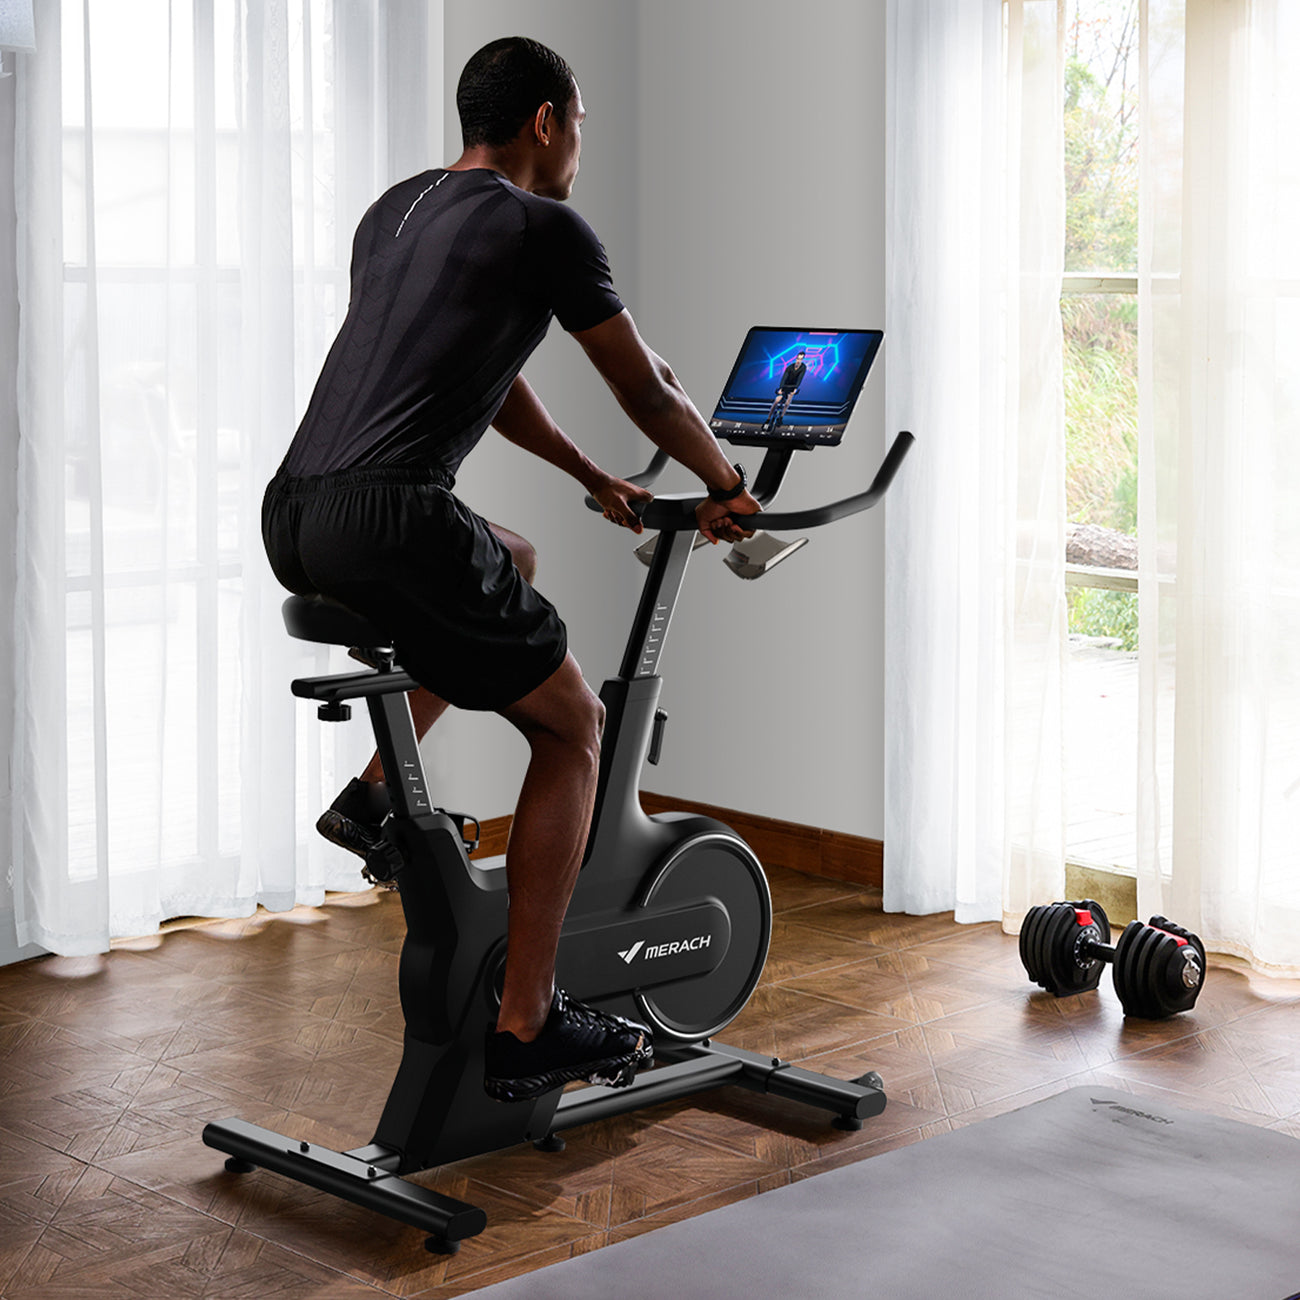 MERACH | CC All-Rounded Exercise Bike Provides A Safer & Quieter Ride